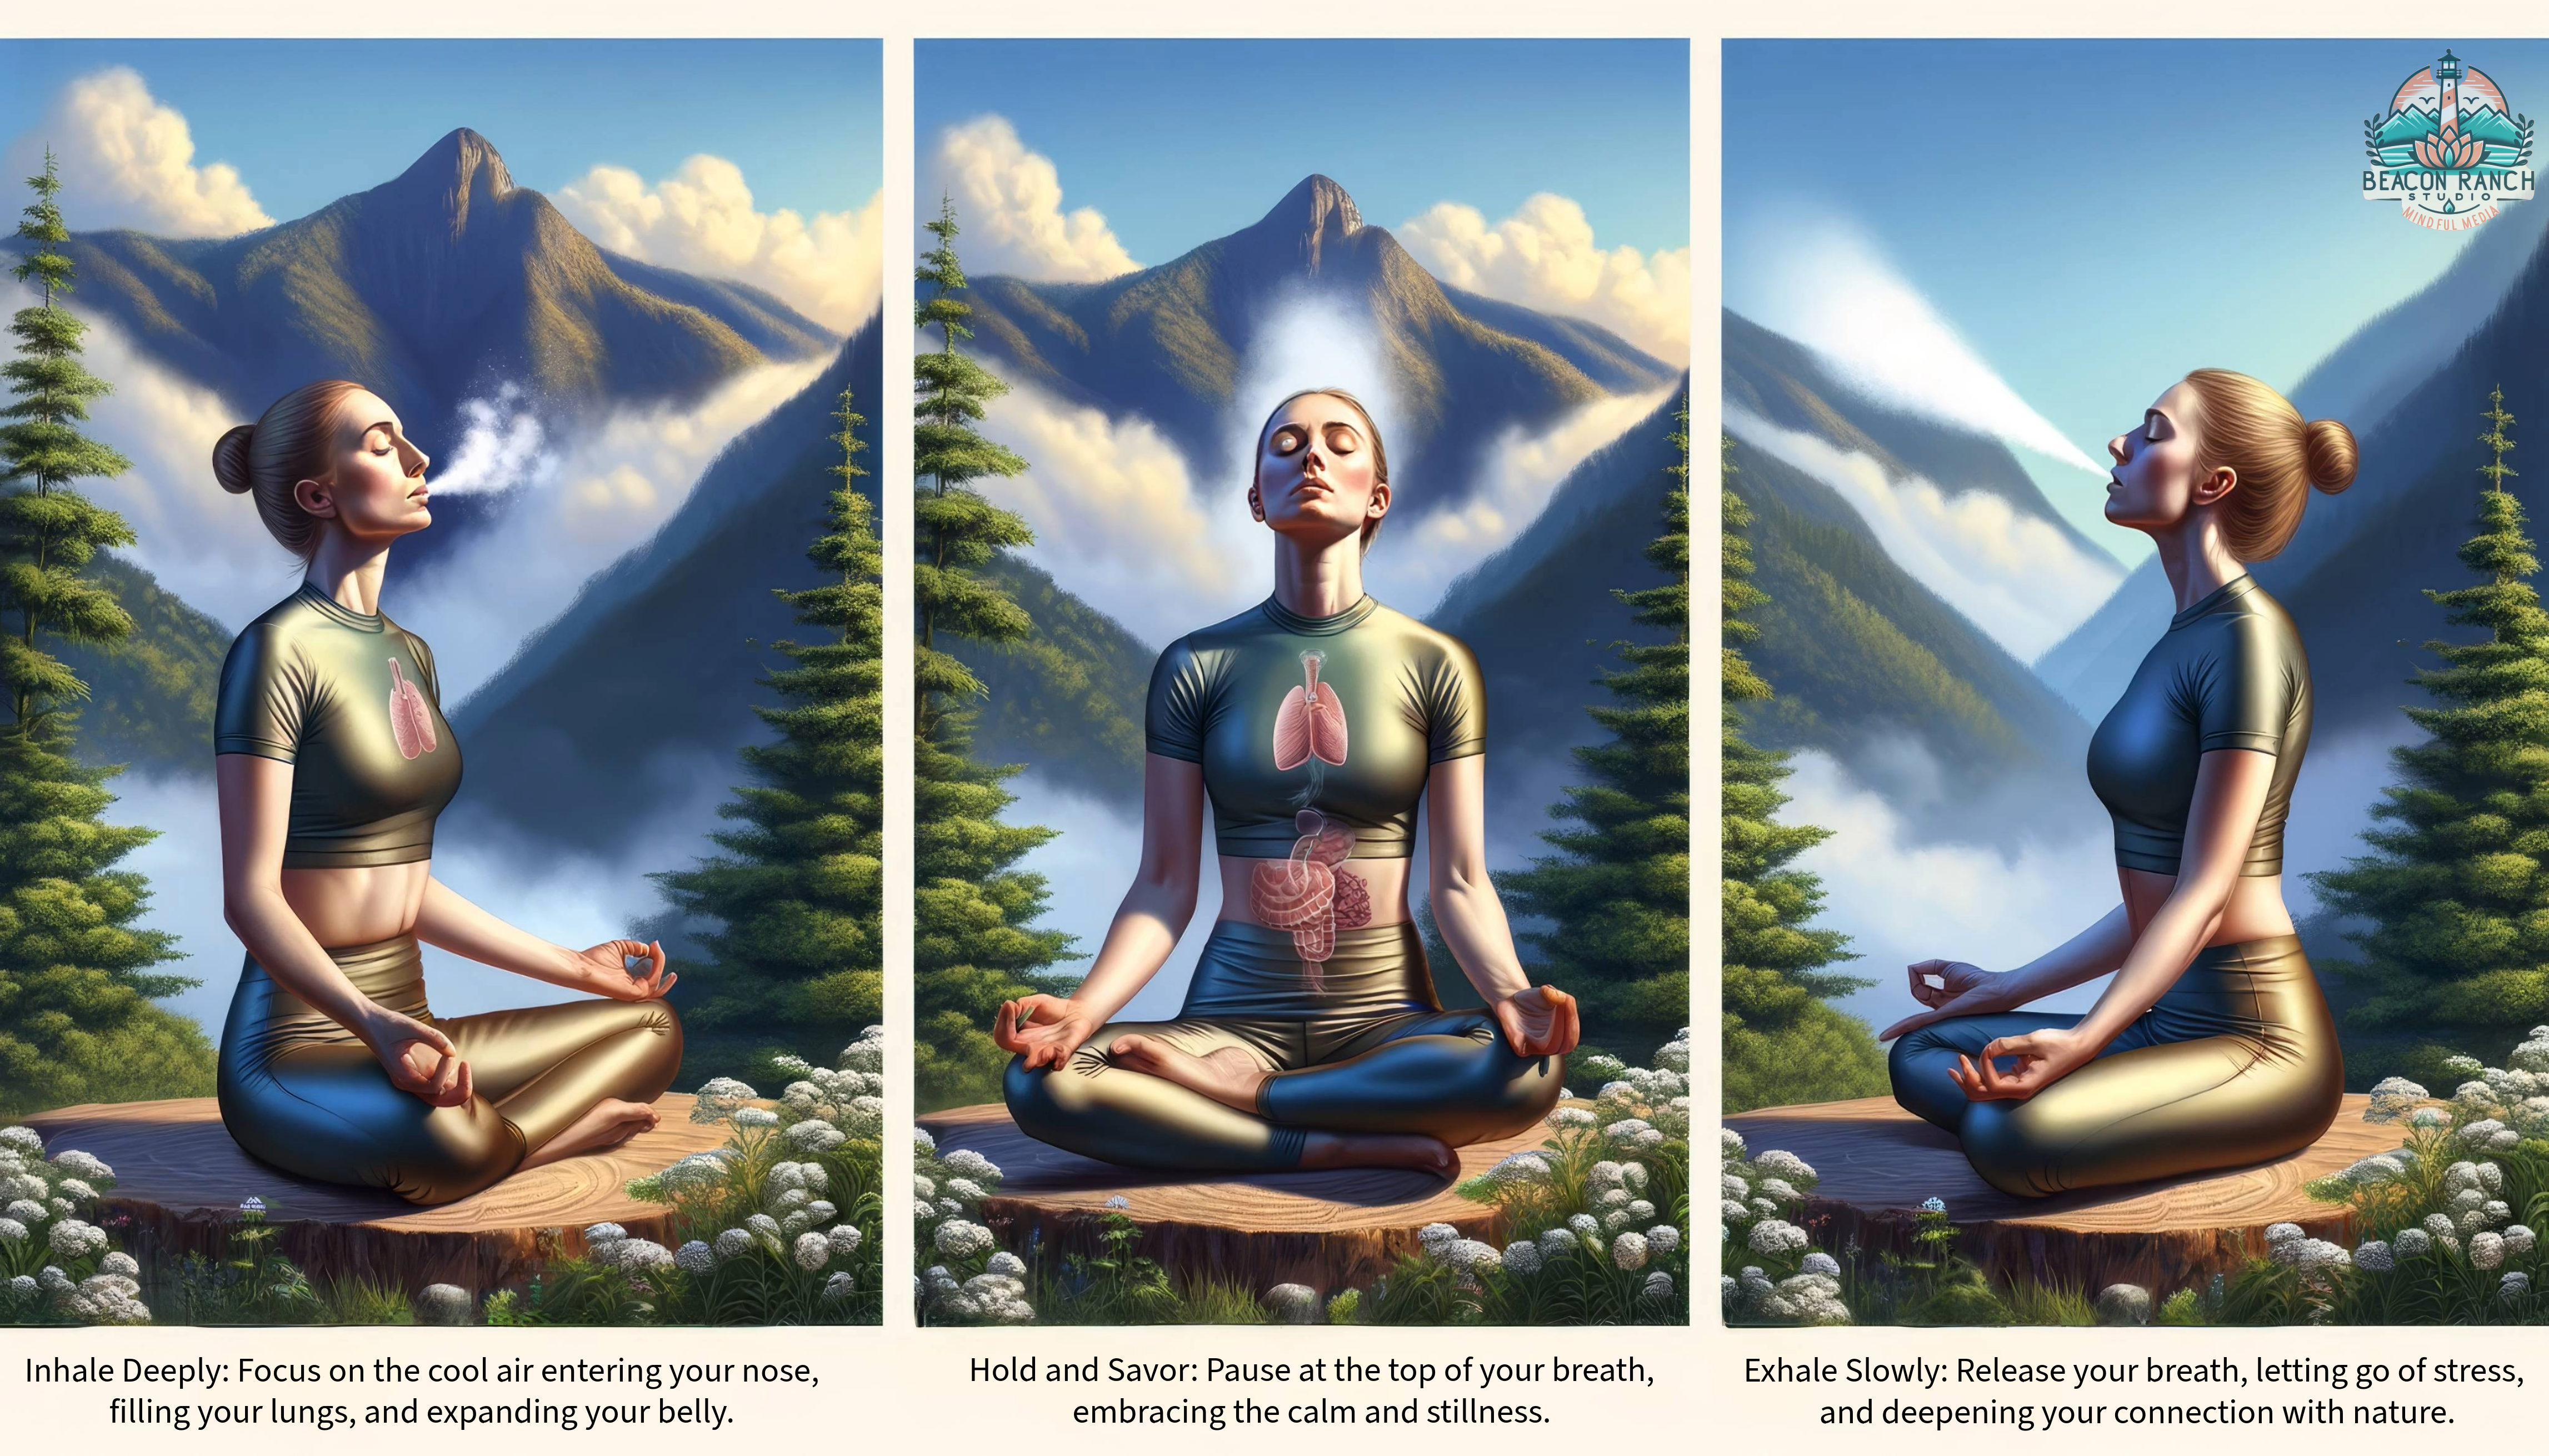 Yoga practitioner in meditative pose with anatomical overlays of organs, set against a serene mountainous backdrop.